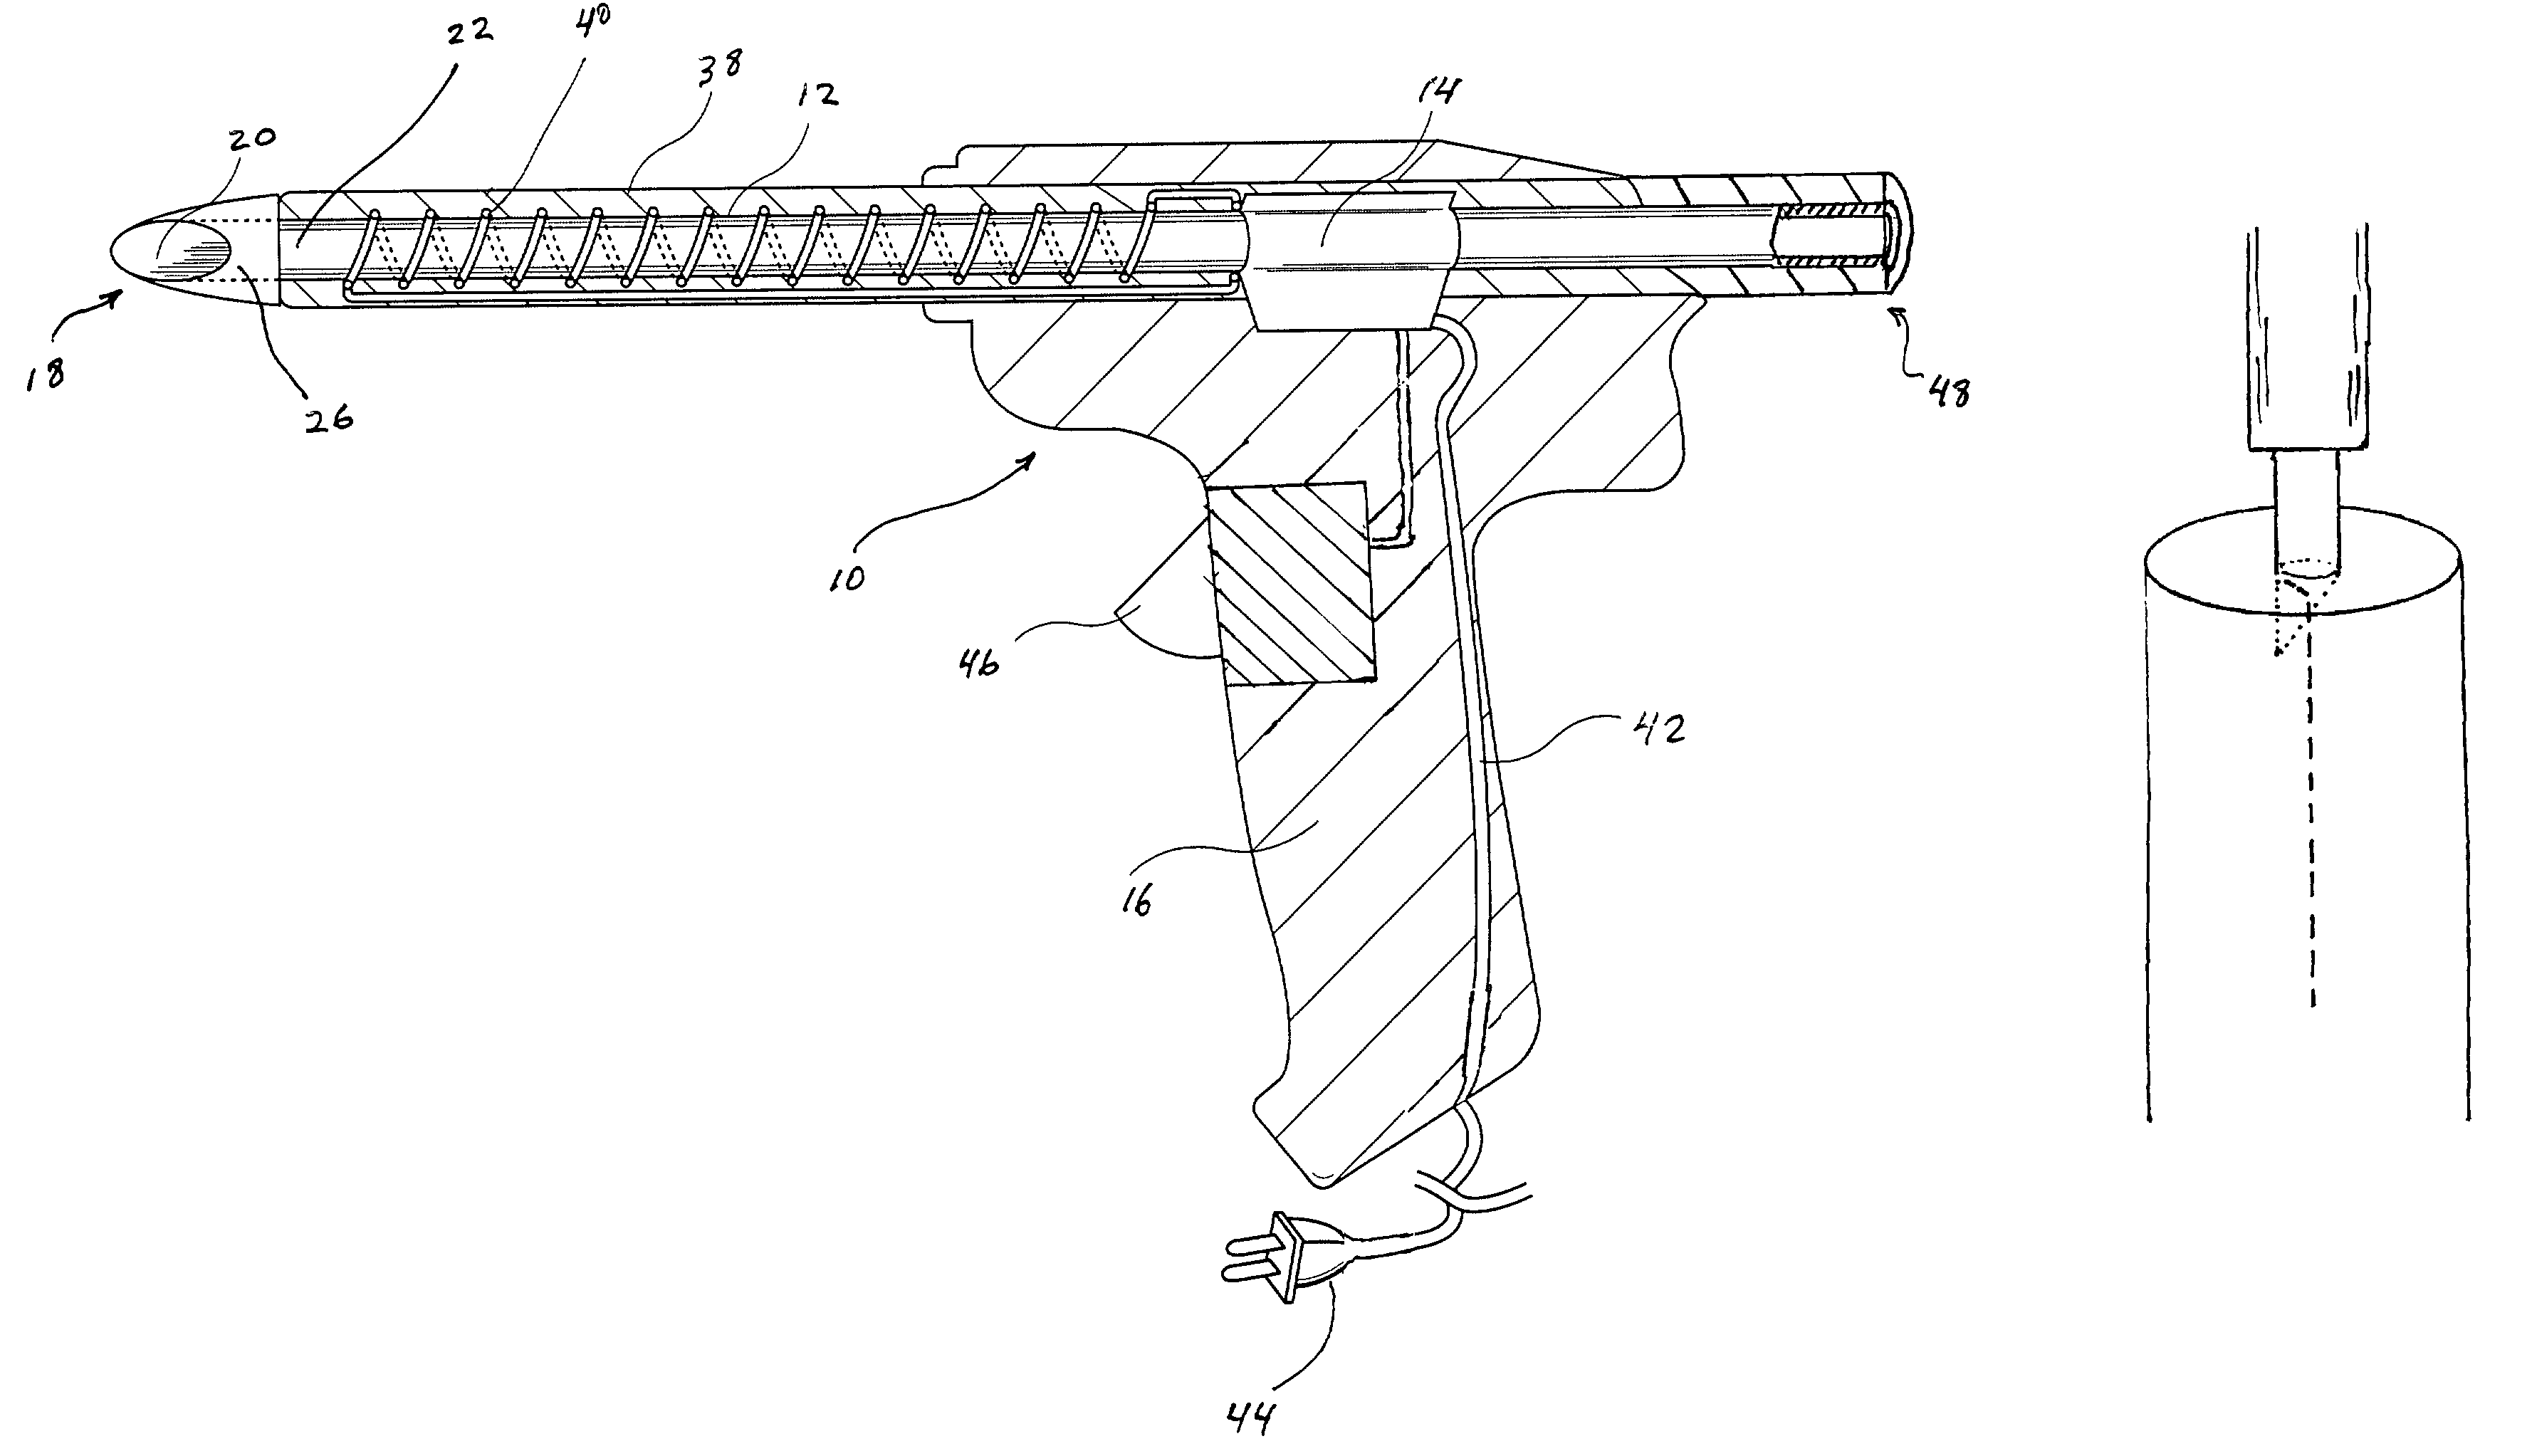 Device and method for exposing a candle wick embedded in candle wax